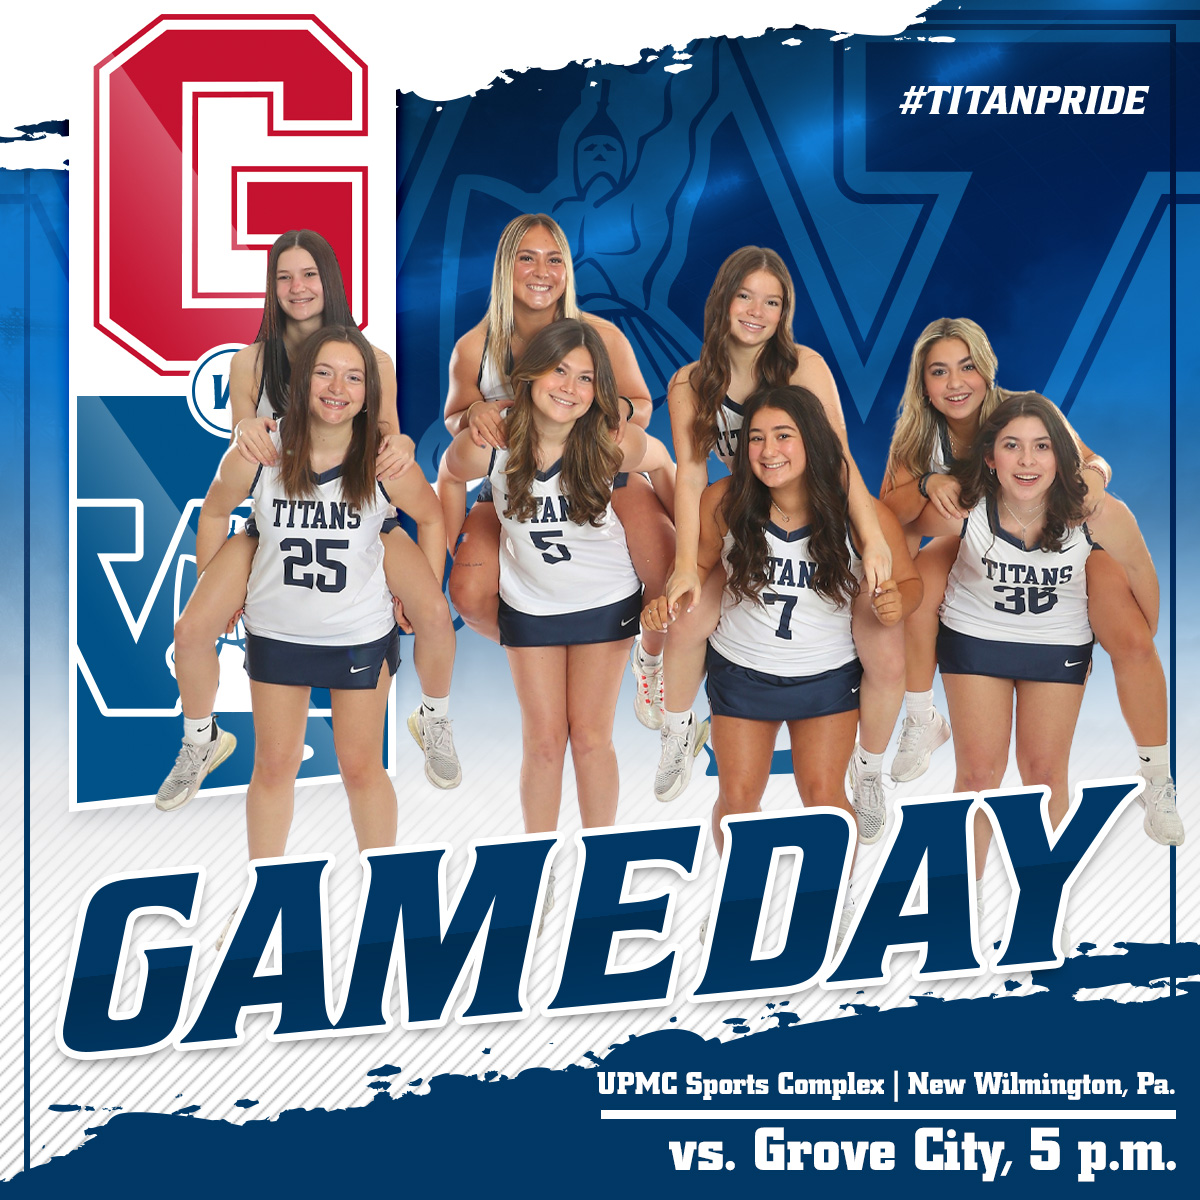 Women's lacrosse host Grove City at the UPMC Sports Complex. Good luck Titans! 🆚Grove City 🕔5 p.m. 📍New Wilmington, Pa. 📺pacdigitalnetwork.com/westminster/?B… #d3wlax #pacwlax #titanpride⚔️